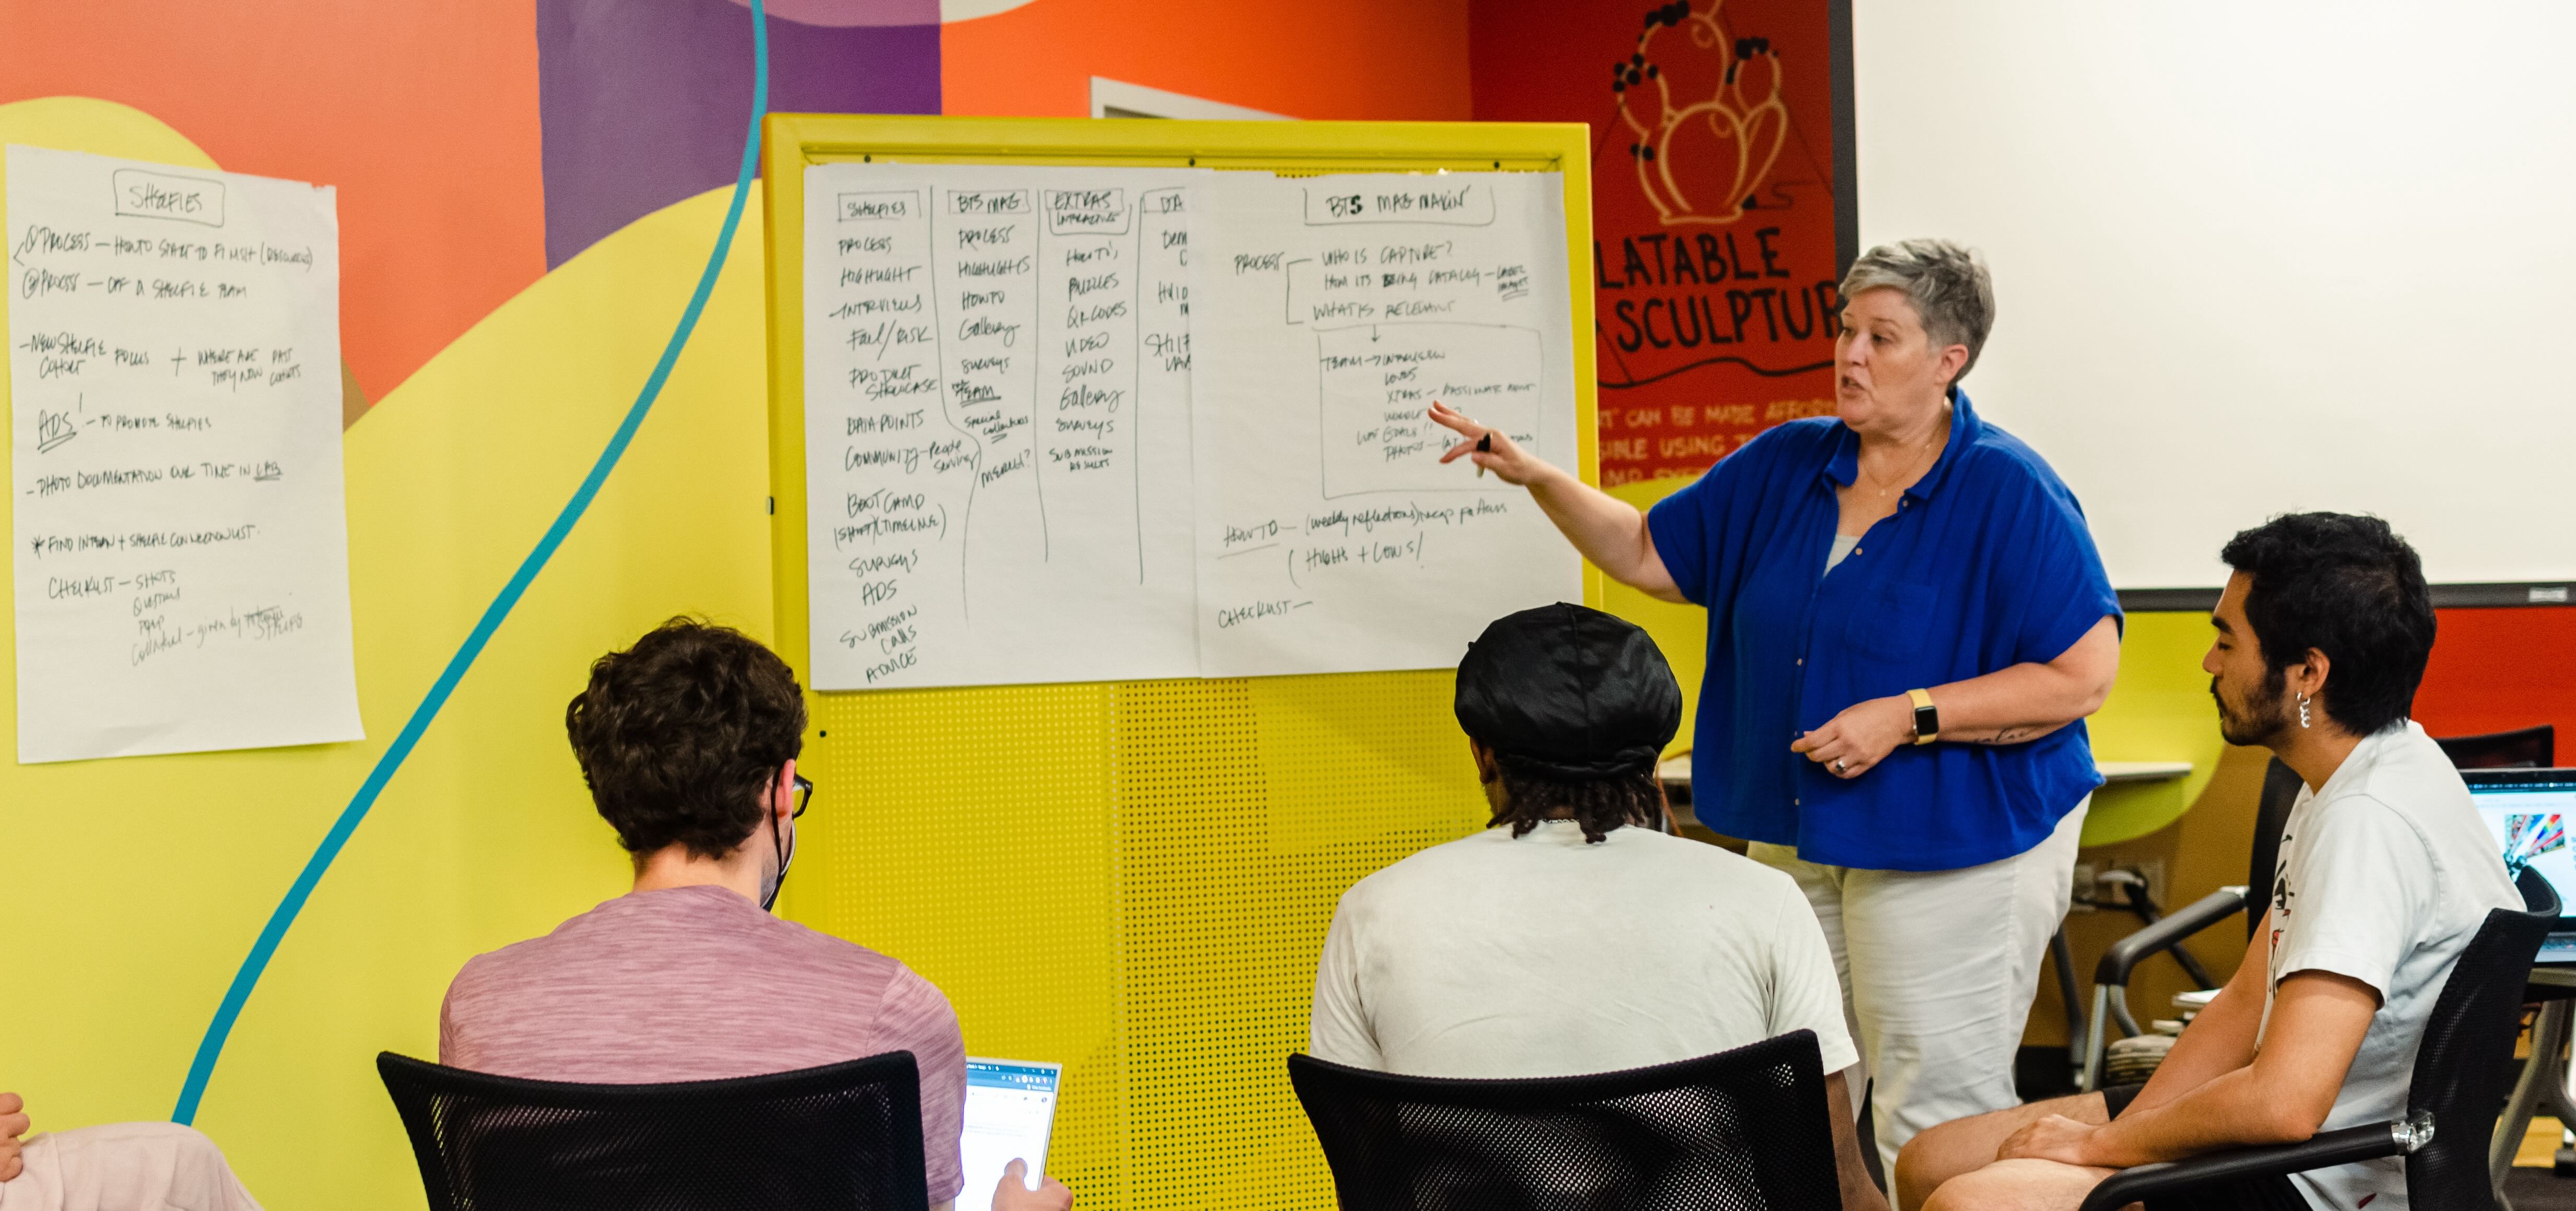 woman leading a small group discussion in front of a white board